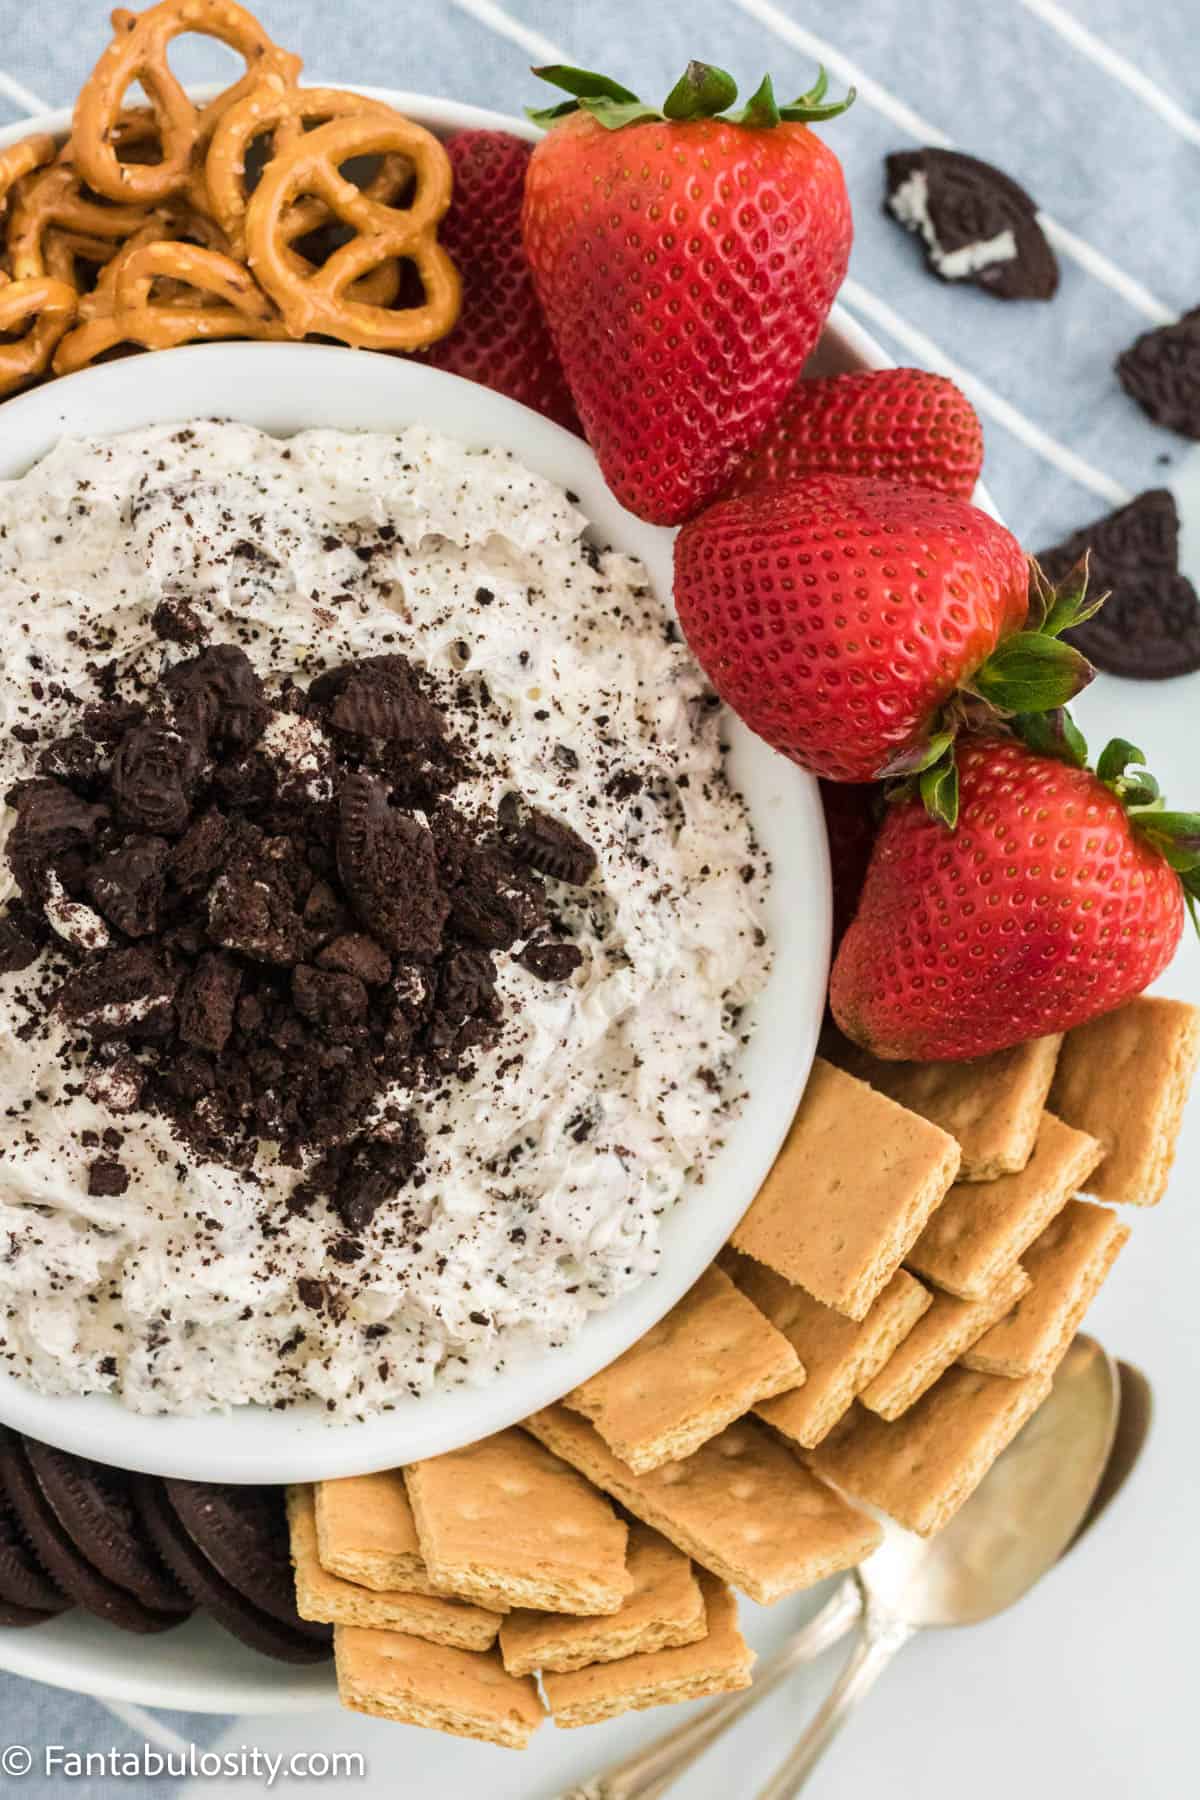 Oreo dip with graham crackers, strawberries and cookies around it.